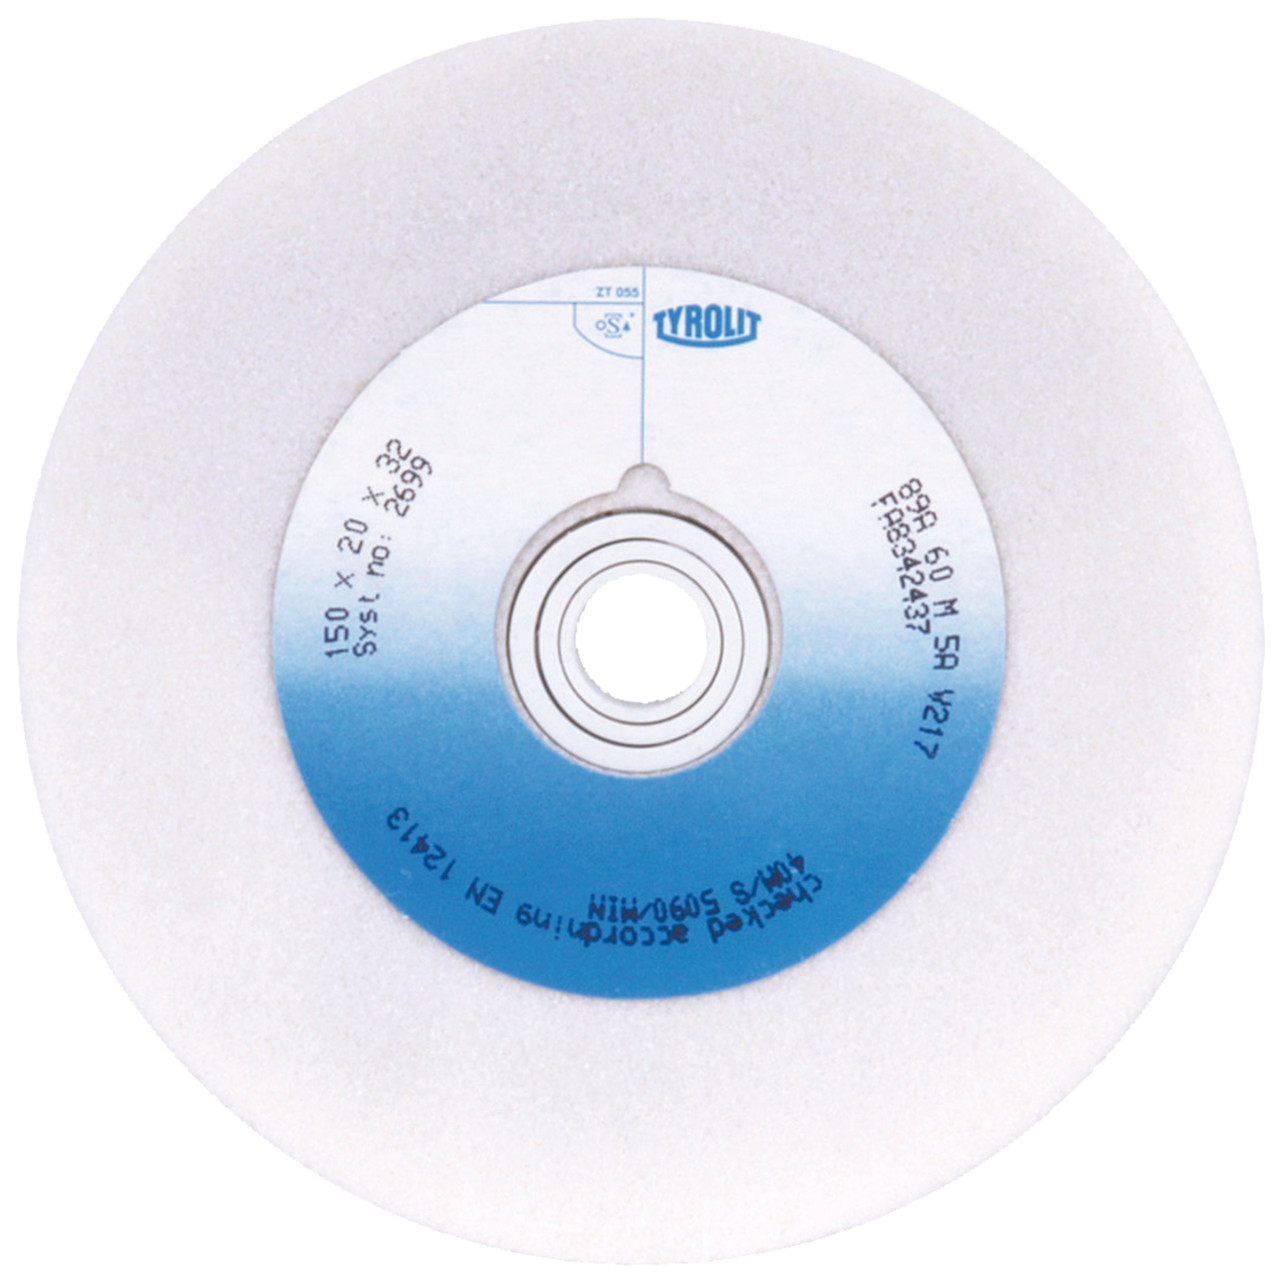 TYROLIT conventional ceramic grinding wheels DxDxH 200x32x51 For high-alloy steels and HSS, shape: 1, Art. 99864